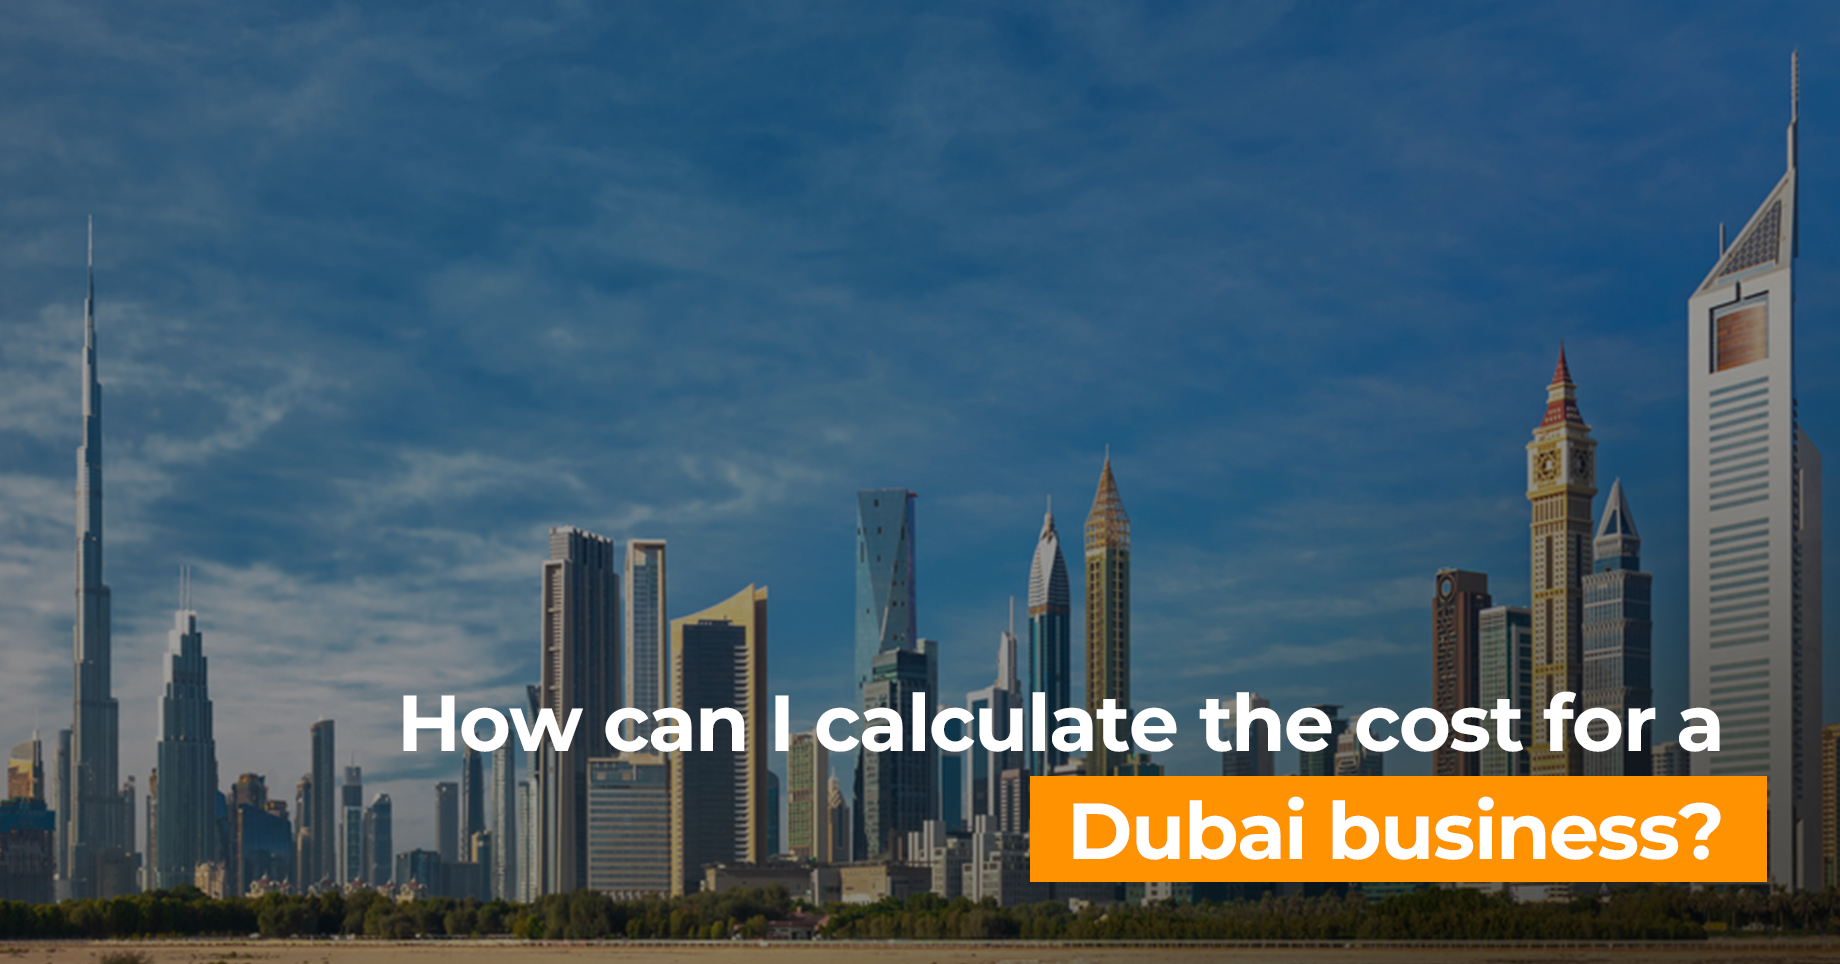 How can I calculate the cost for a Dubai business?